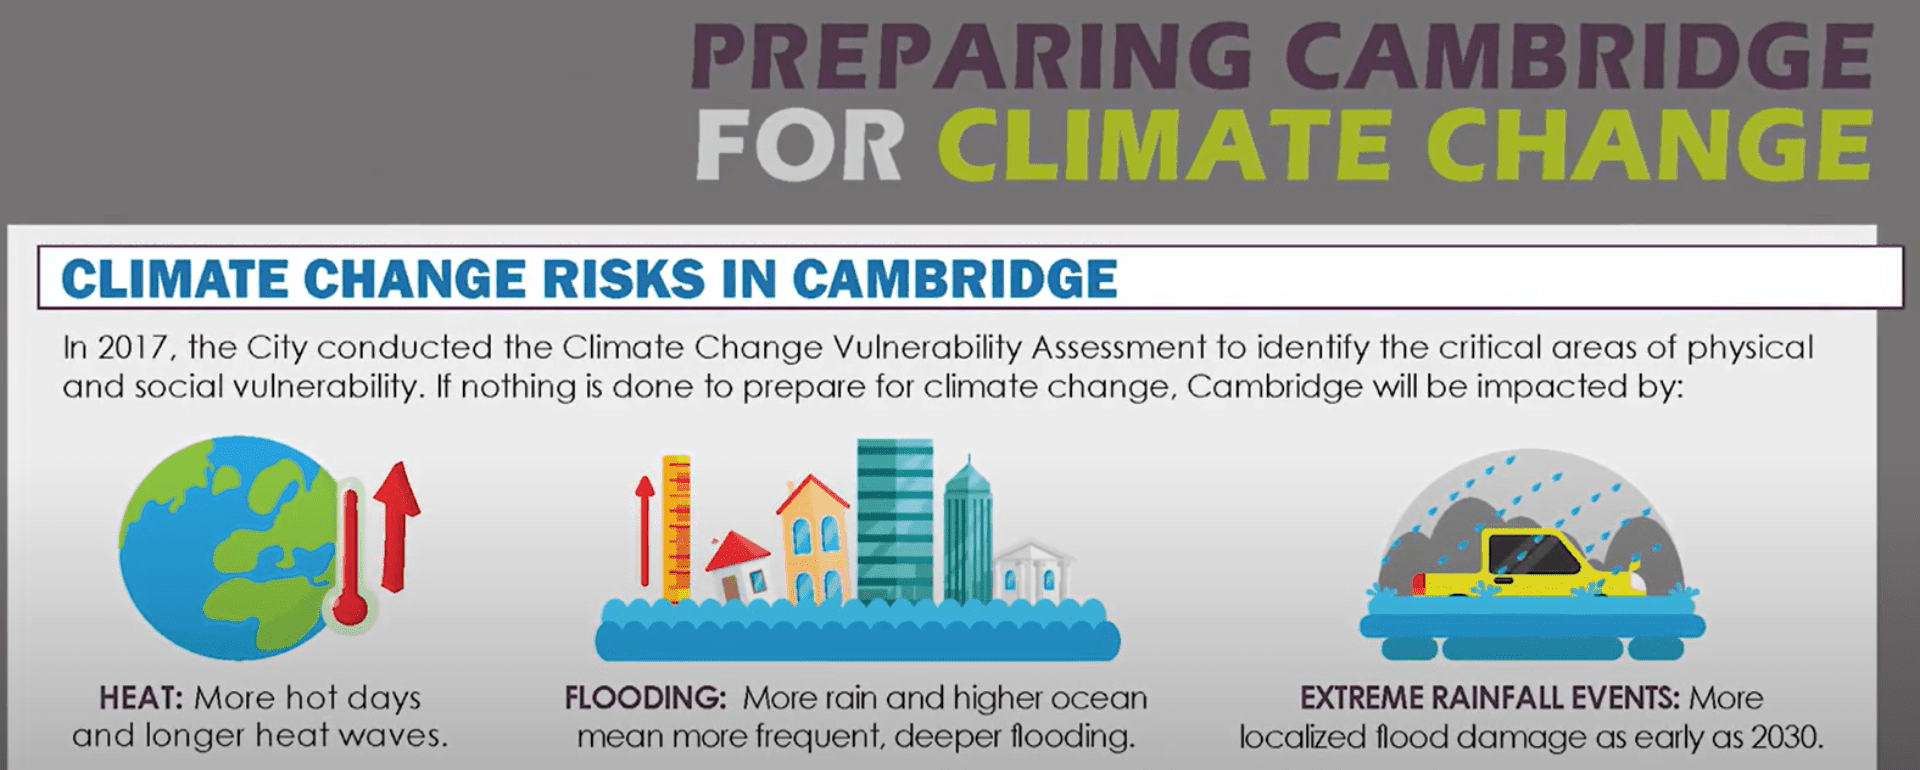 Preparing Cambridge for Climate Change Video Cover Image